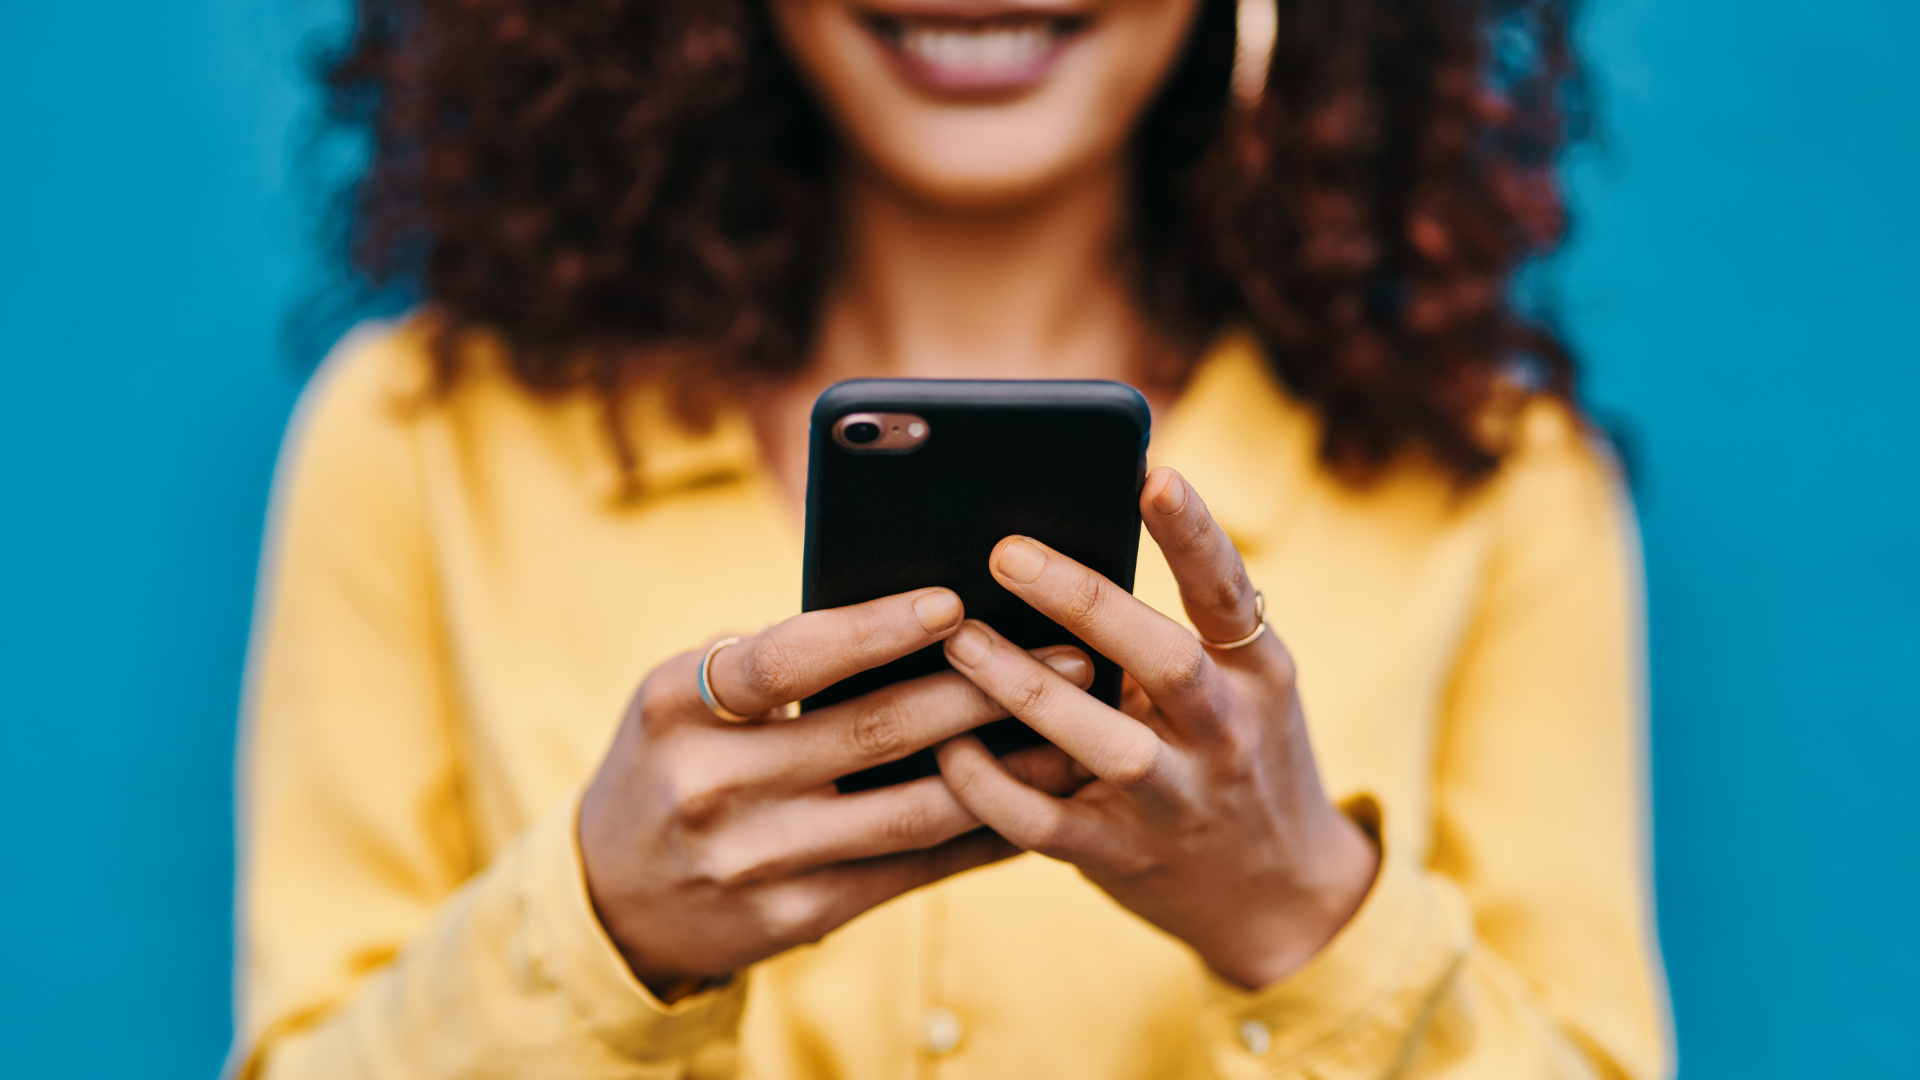 Woman in a yellow shirt holding a phone into focus